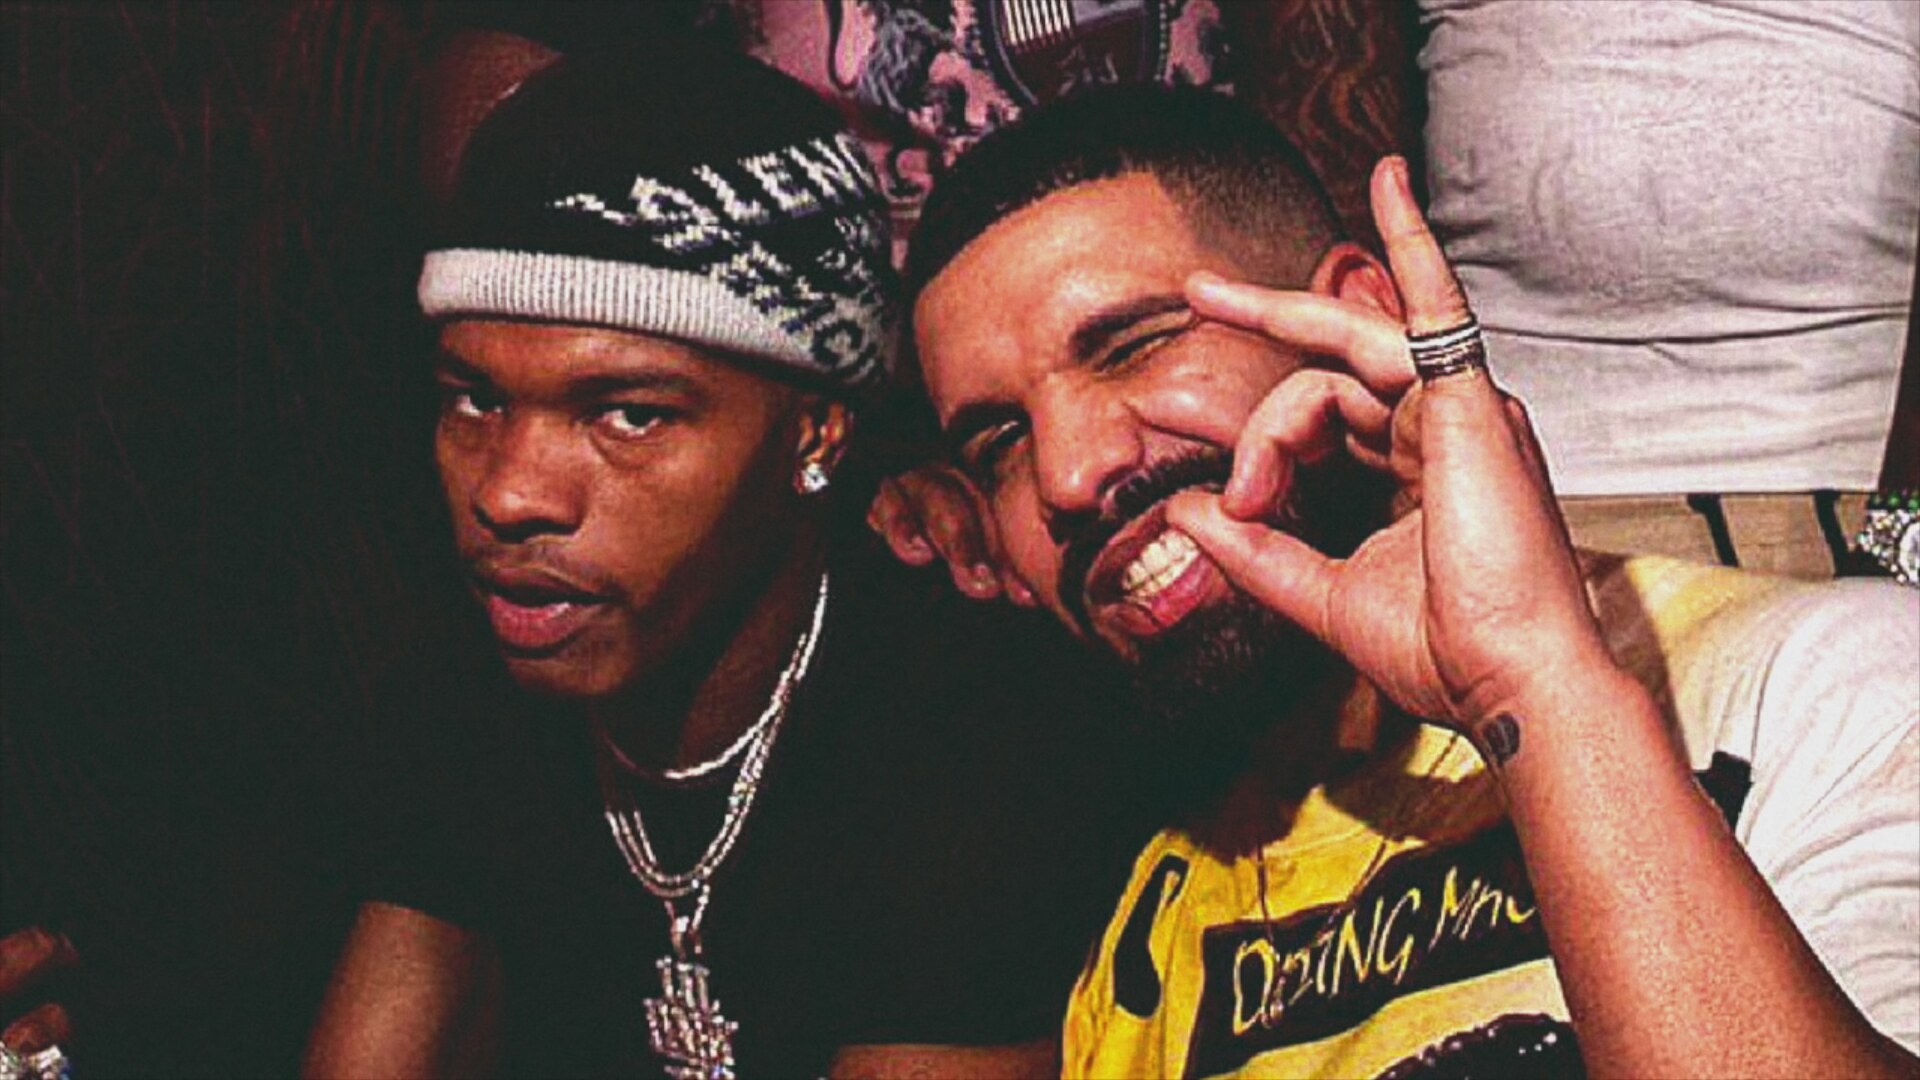 Lil baby x Drake. Yes Indeed – PS4Wallpapers.com - 1920 x 1080 jpeg 271kB